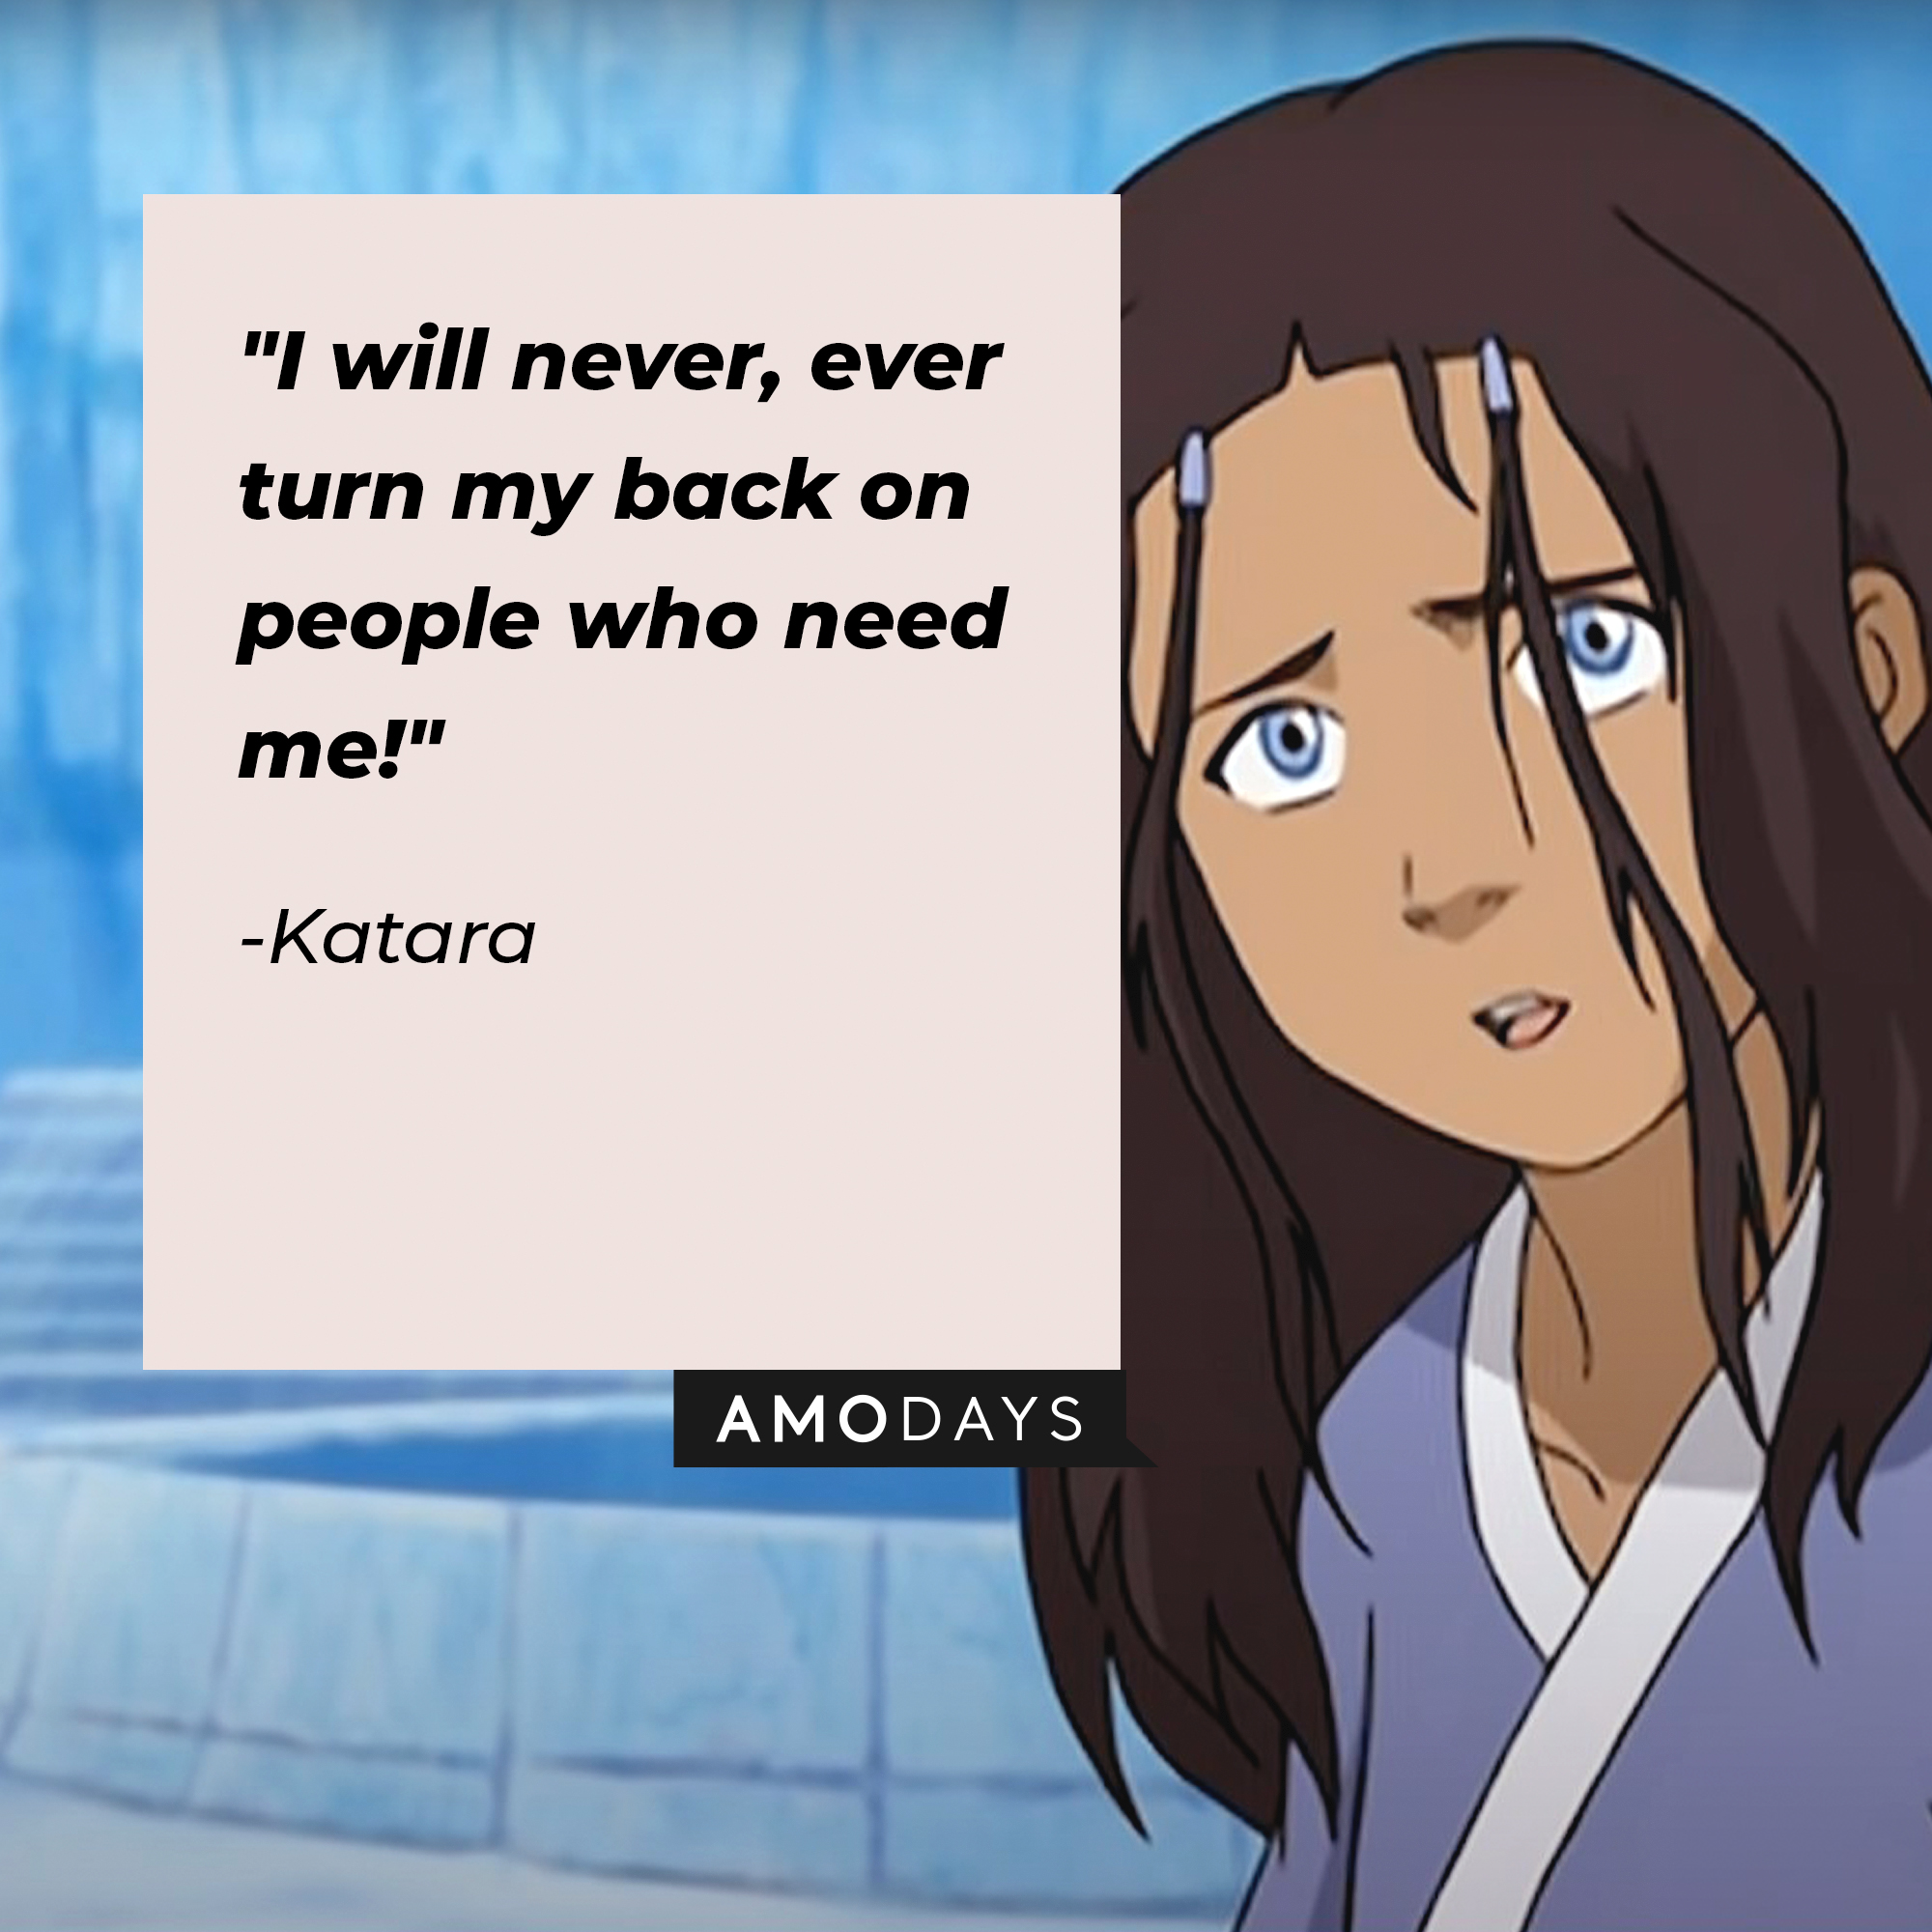 Katara's quote: "I will never, ever turn my back on people who need me!" | Source: Youtube.com/TeamAvatar